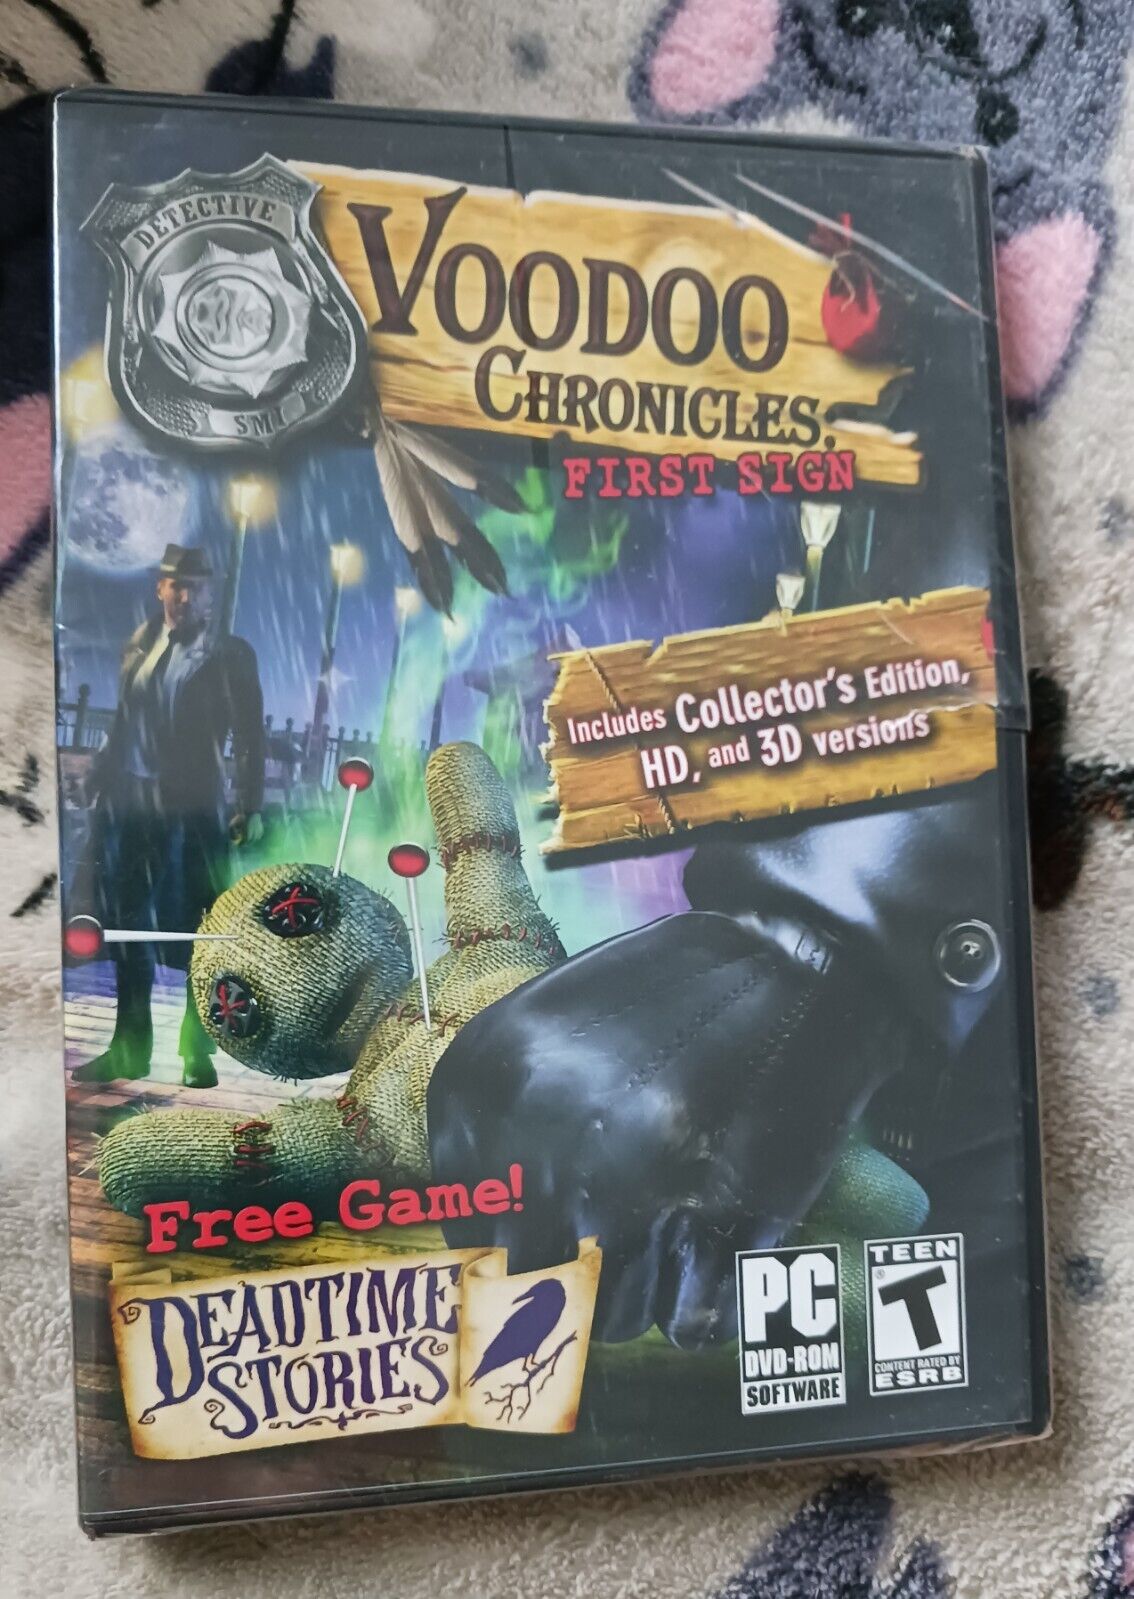 NEW Voodoo Chronicles First Sign PC Software HD & 3D Free Game Deadtime Stories